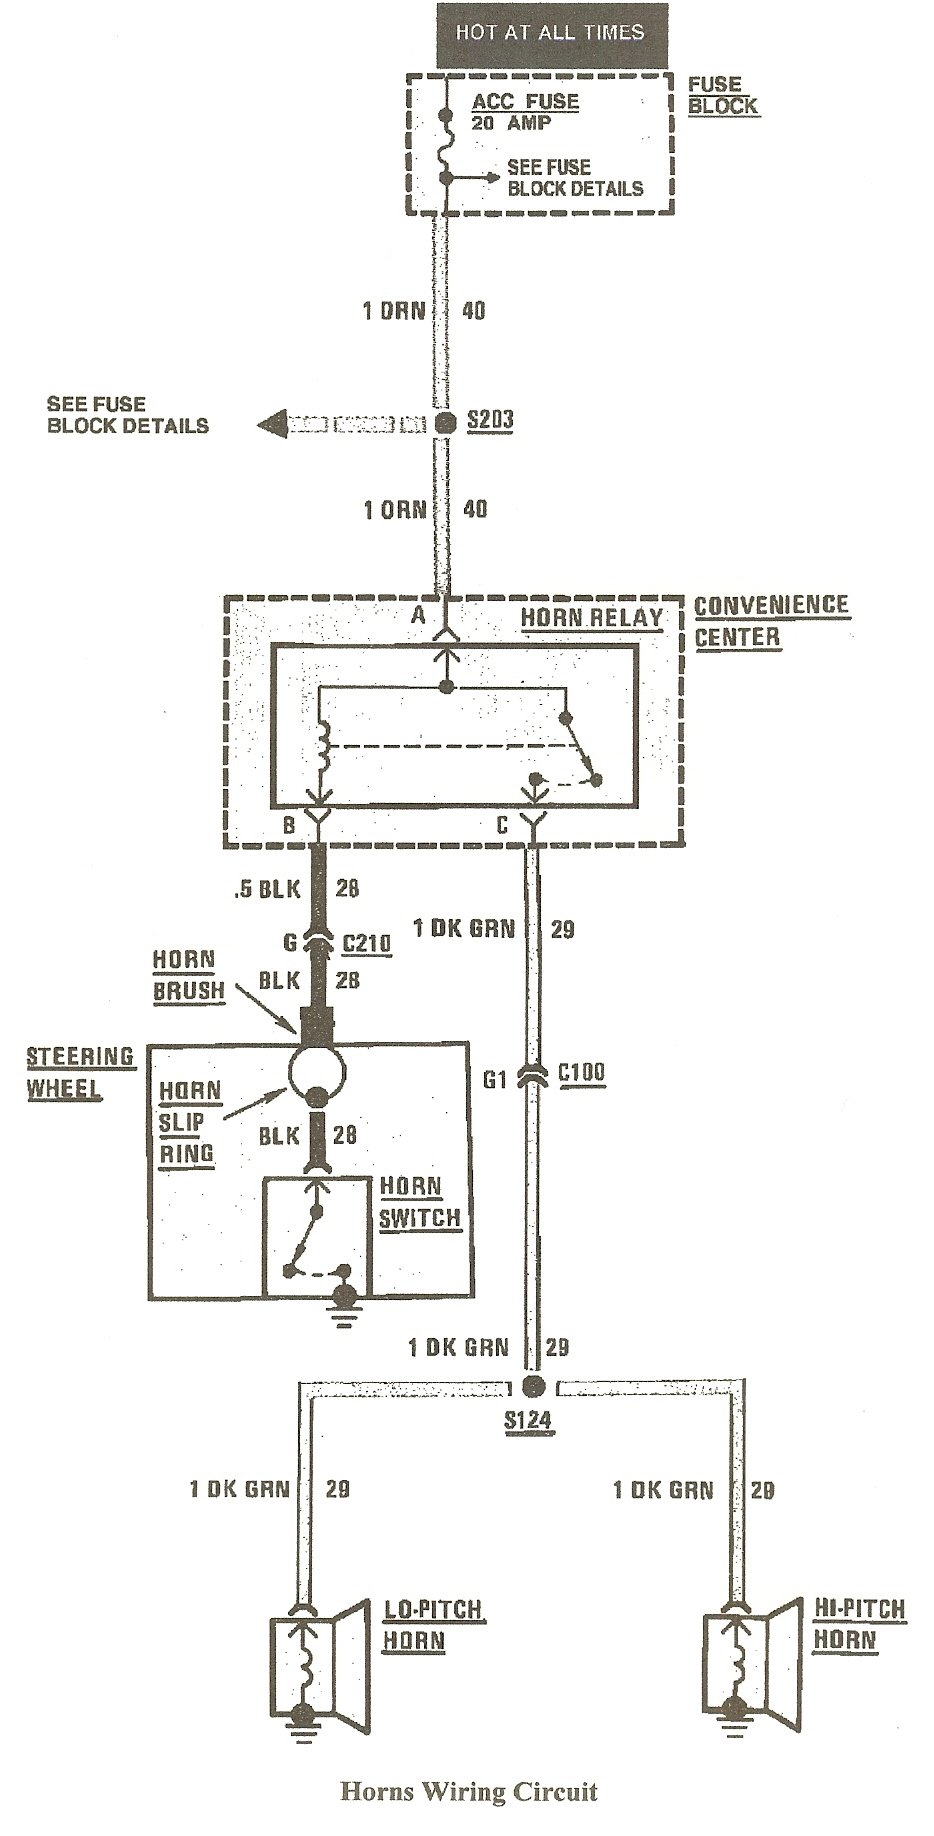 88chevy 1500 ignition wiring diagram